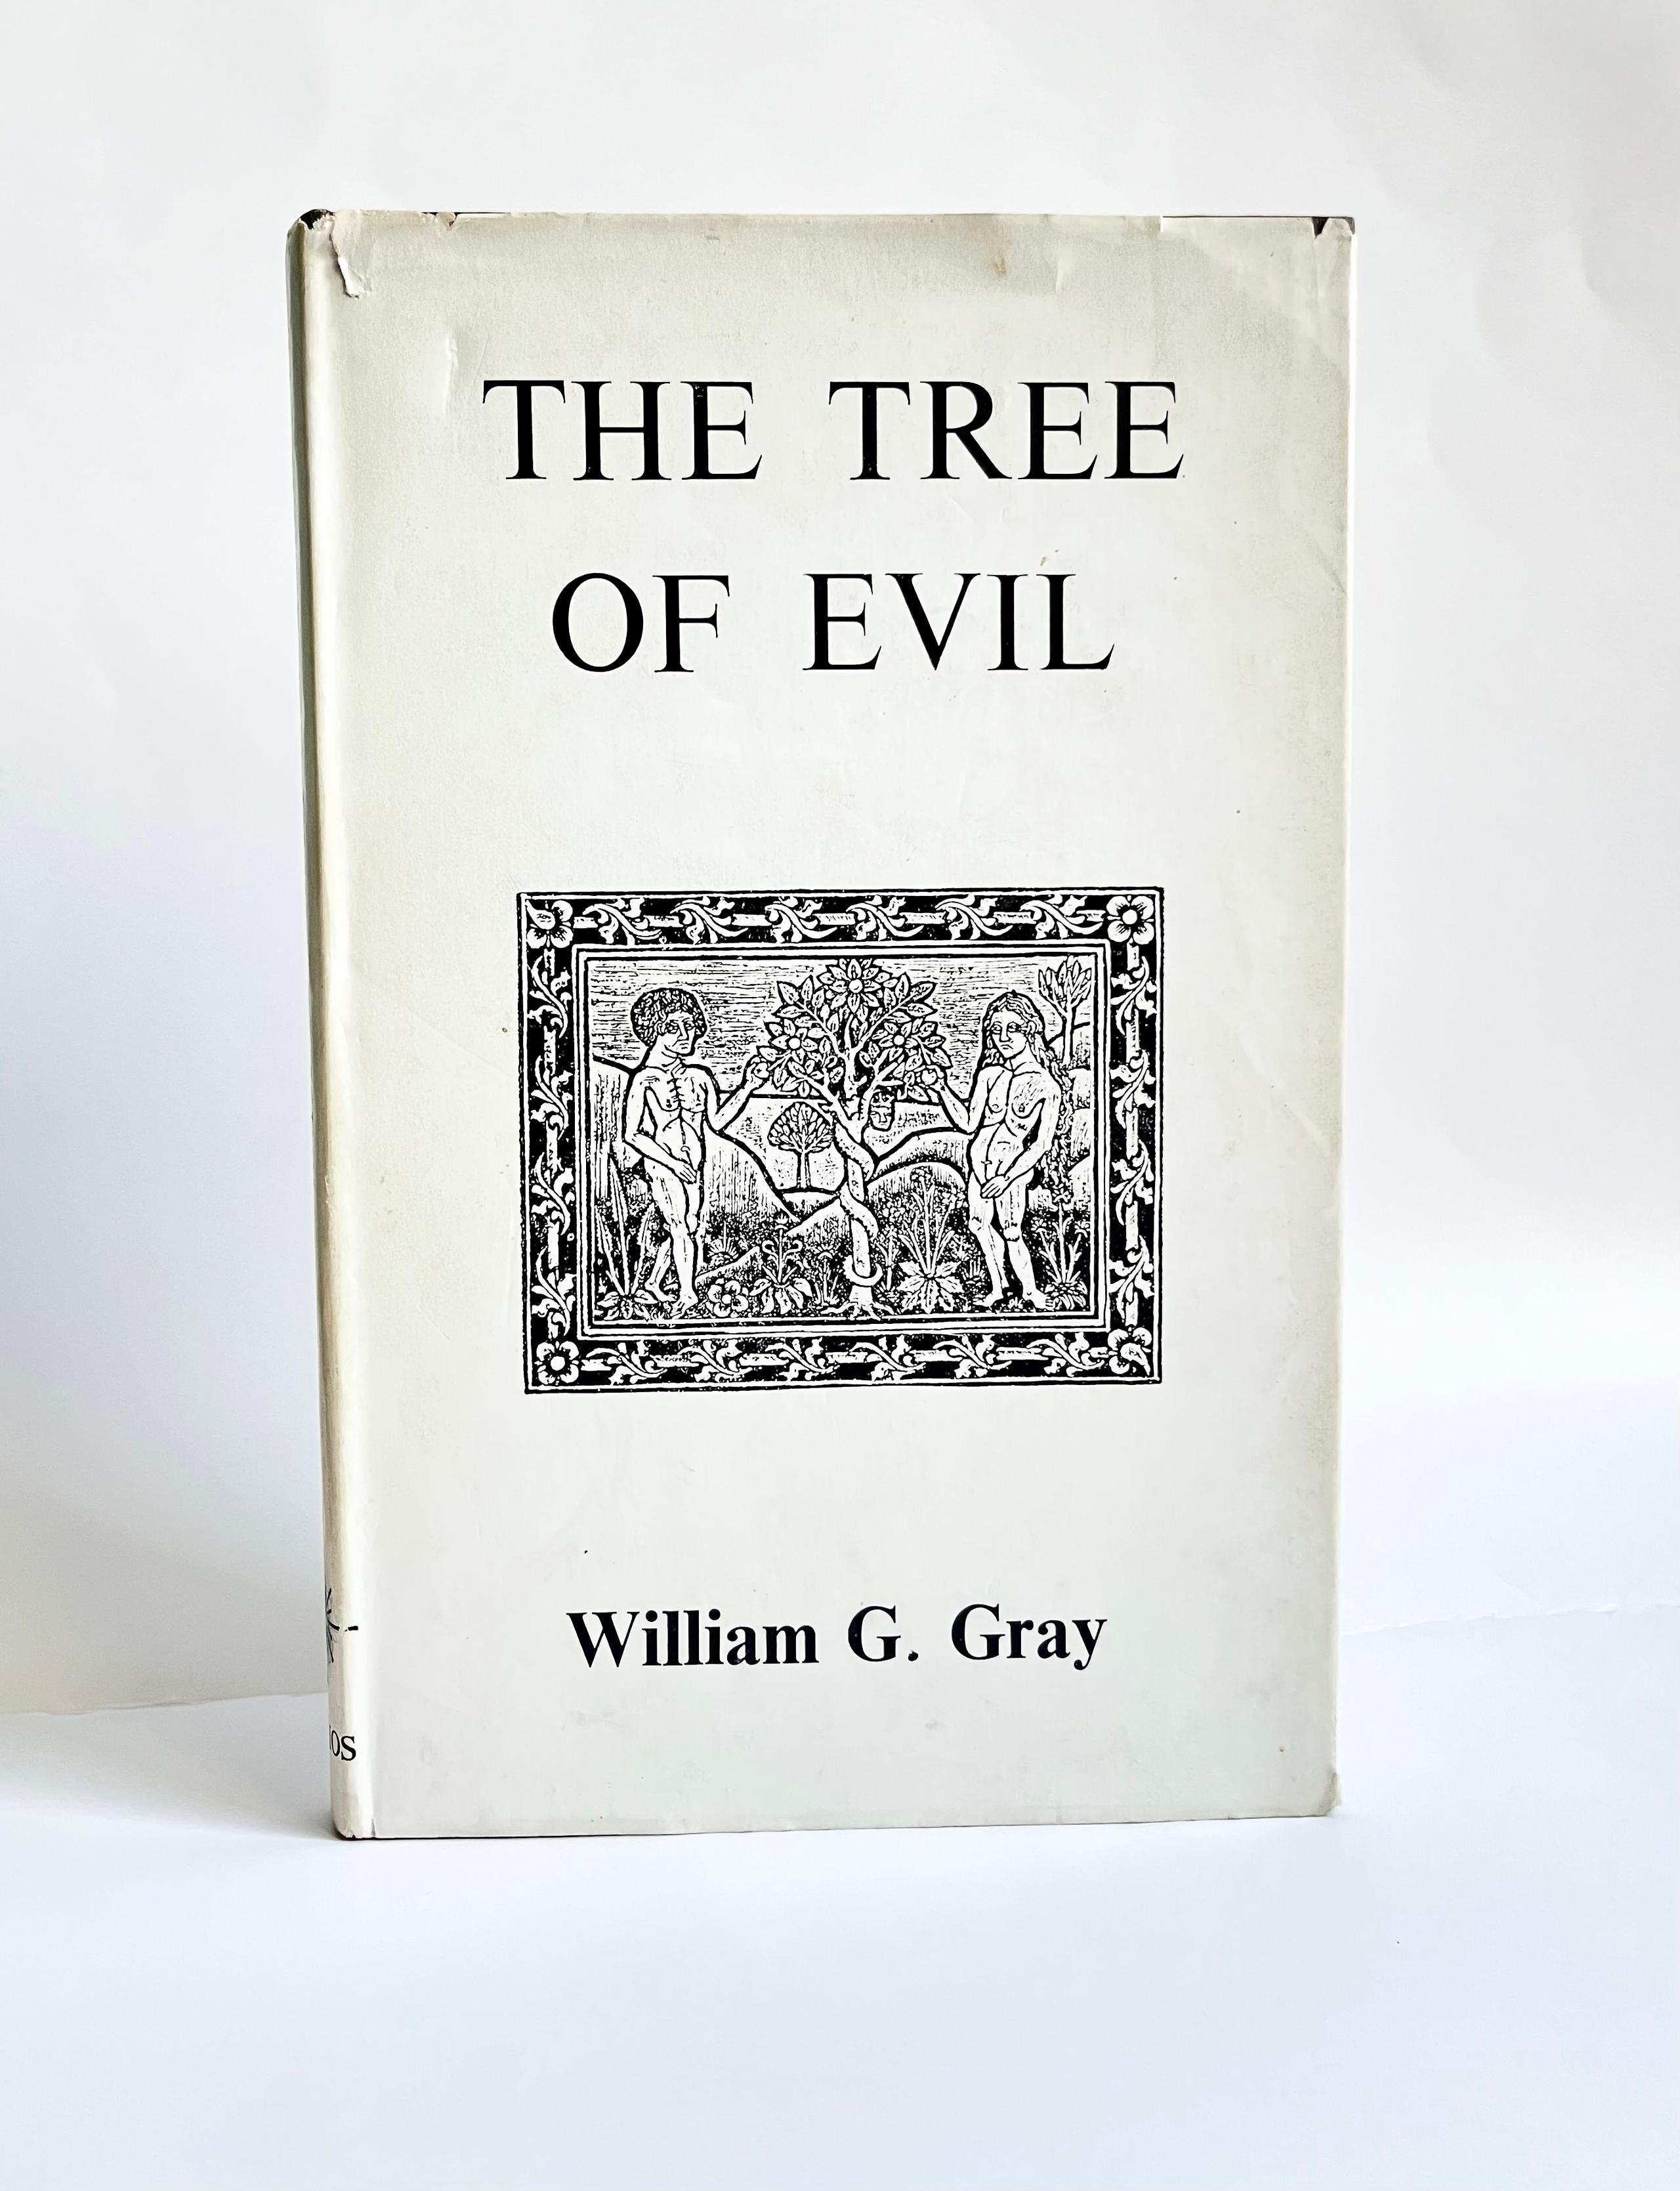 The Tree of Evil by William G. Gray